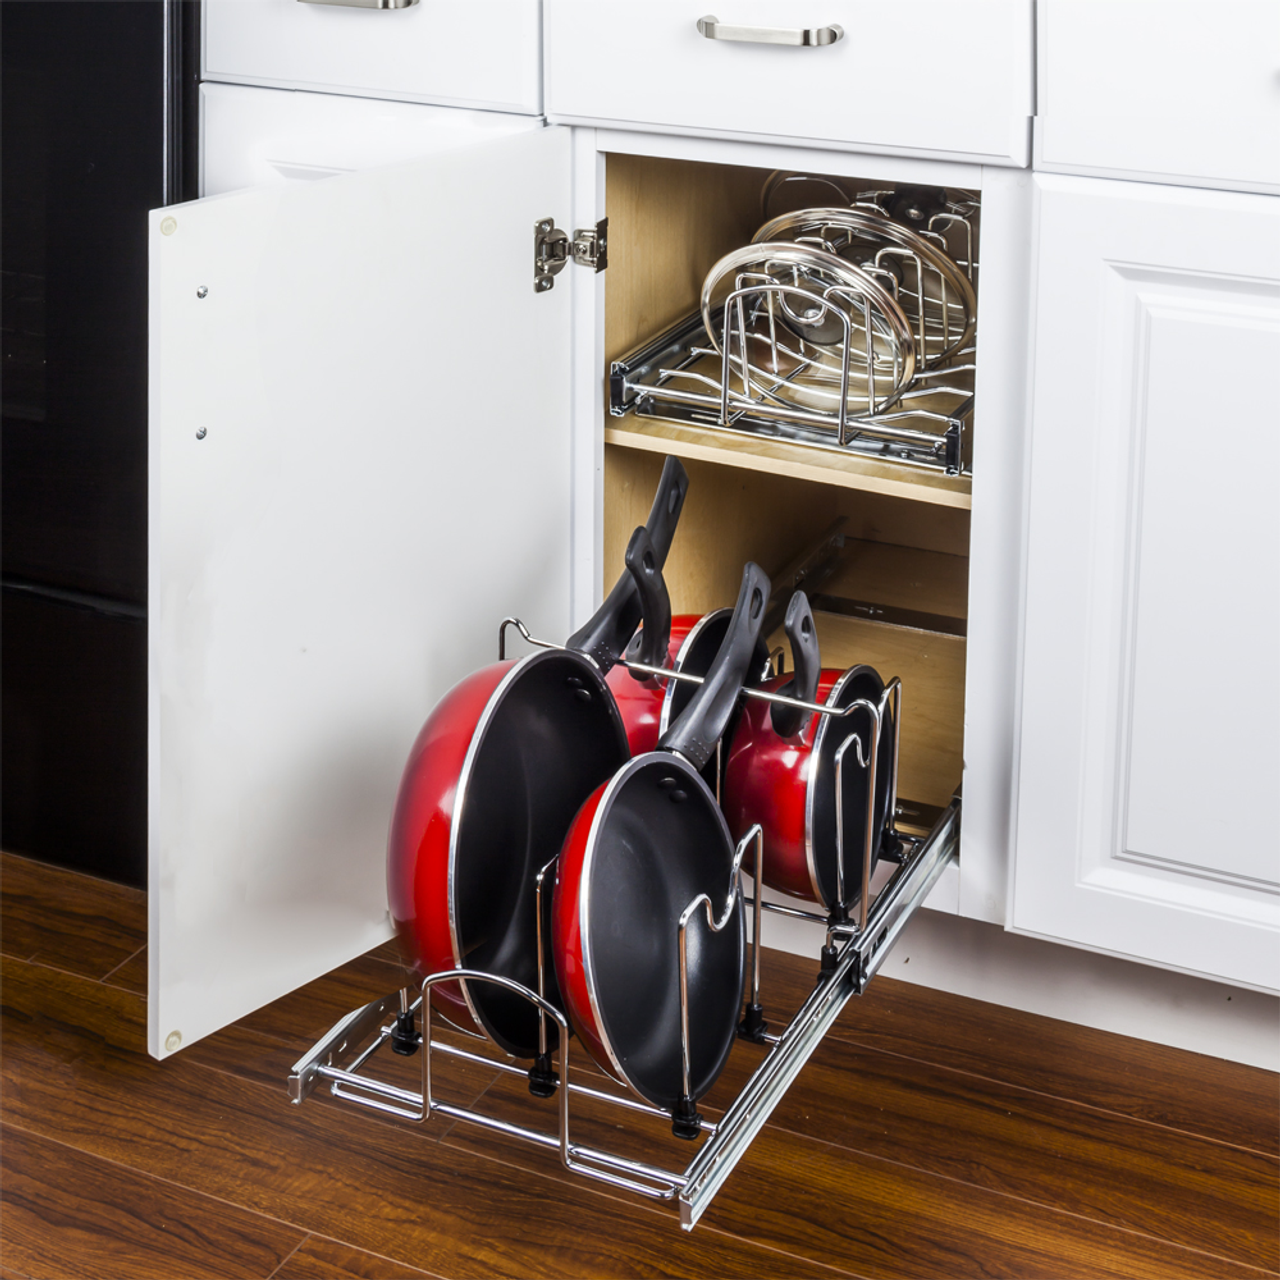 11 Minute Organizers 5 Base Cabinet Spice Rack Pullout